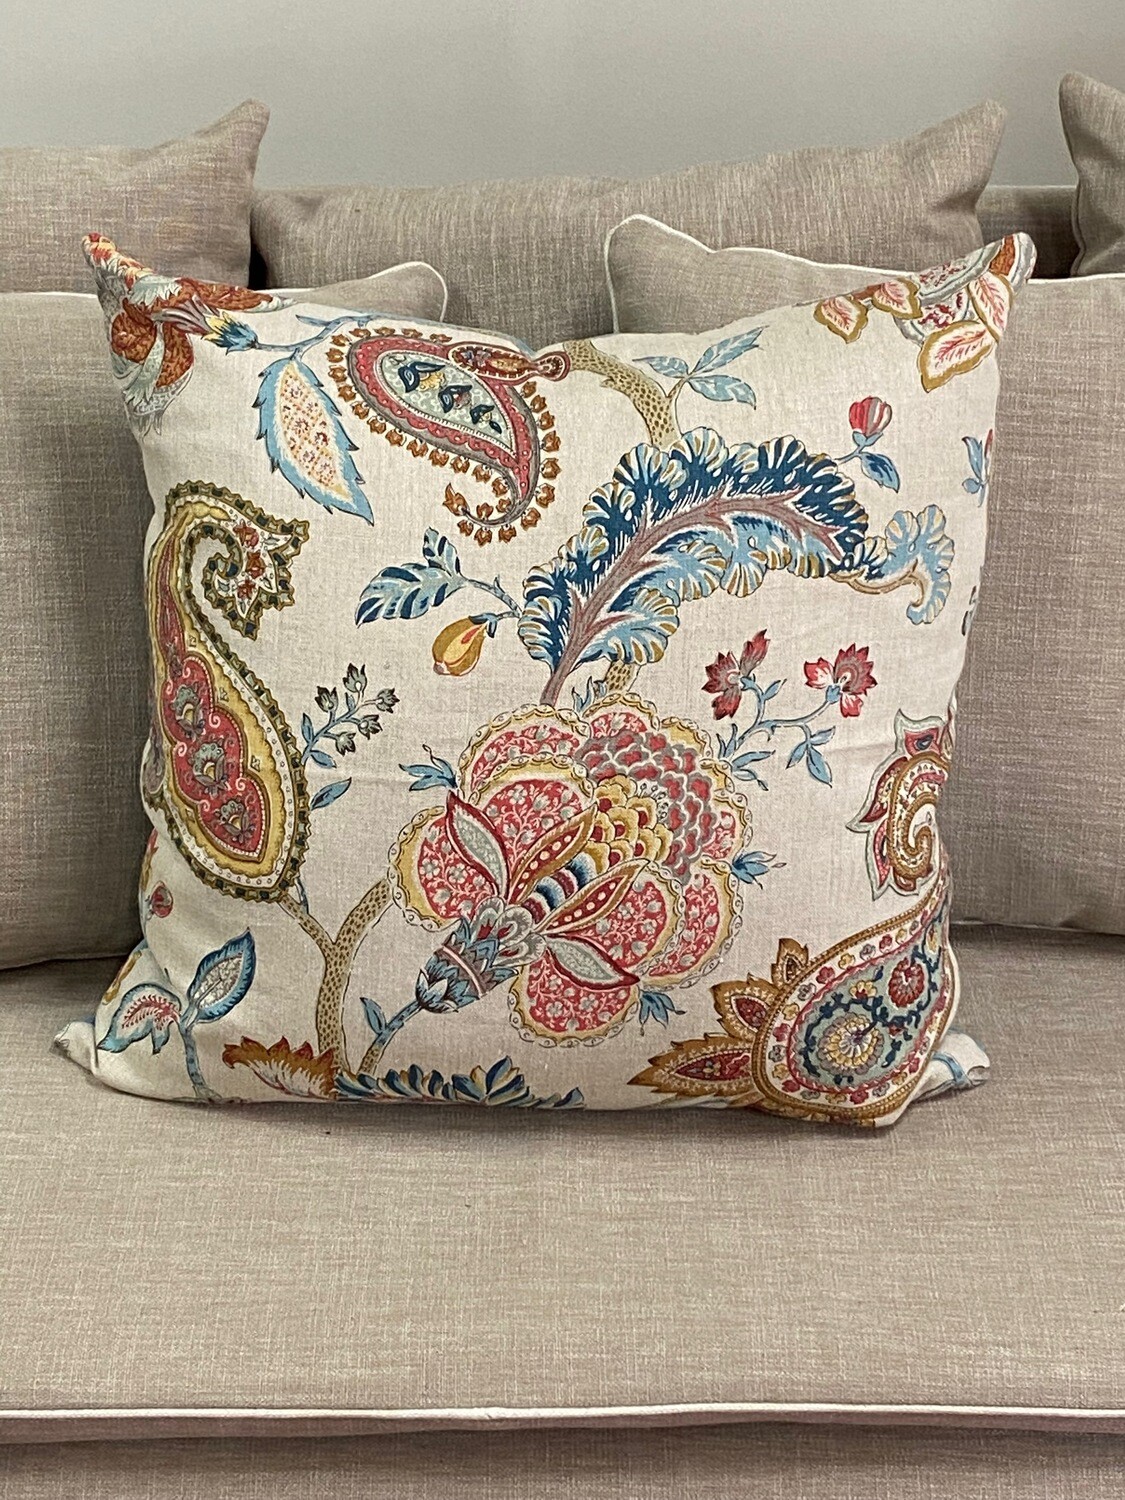 Large scatter cushion featuring Jacobean era flowers